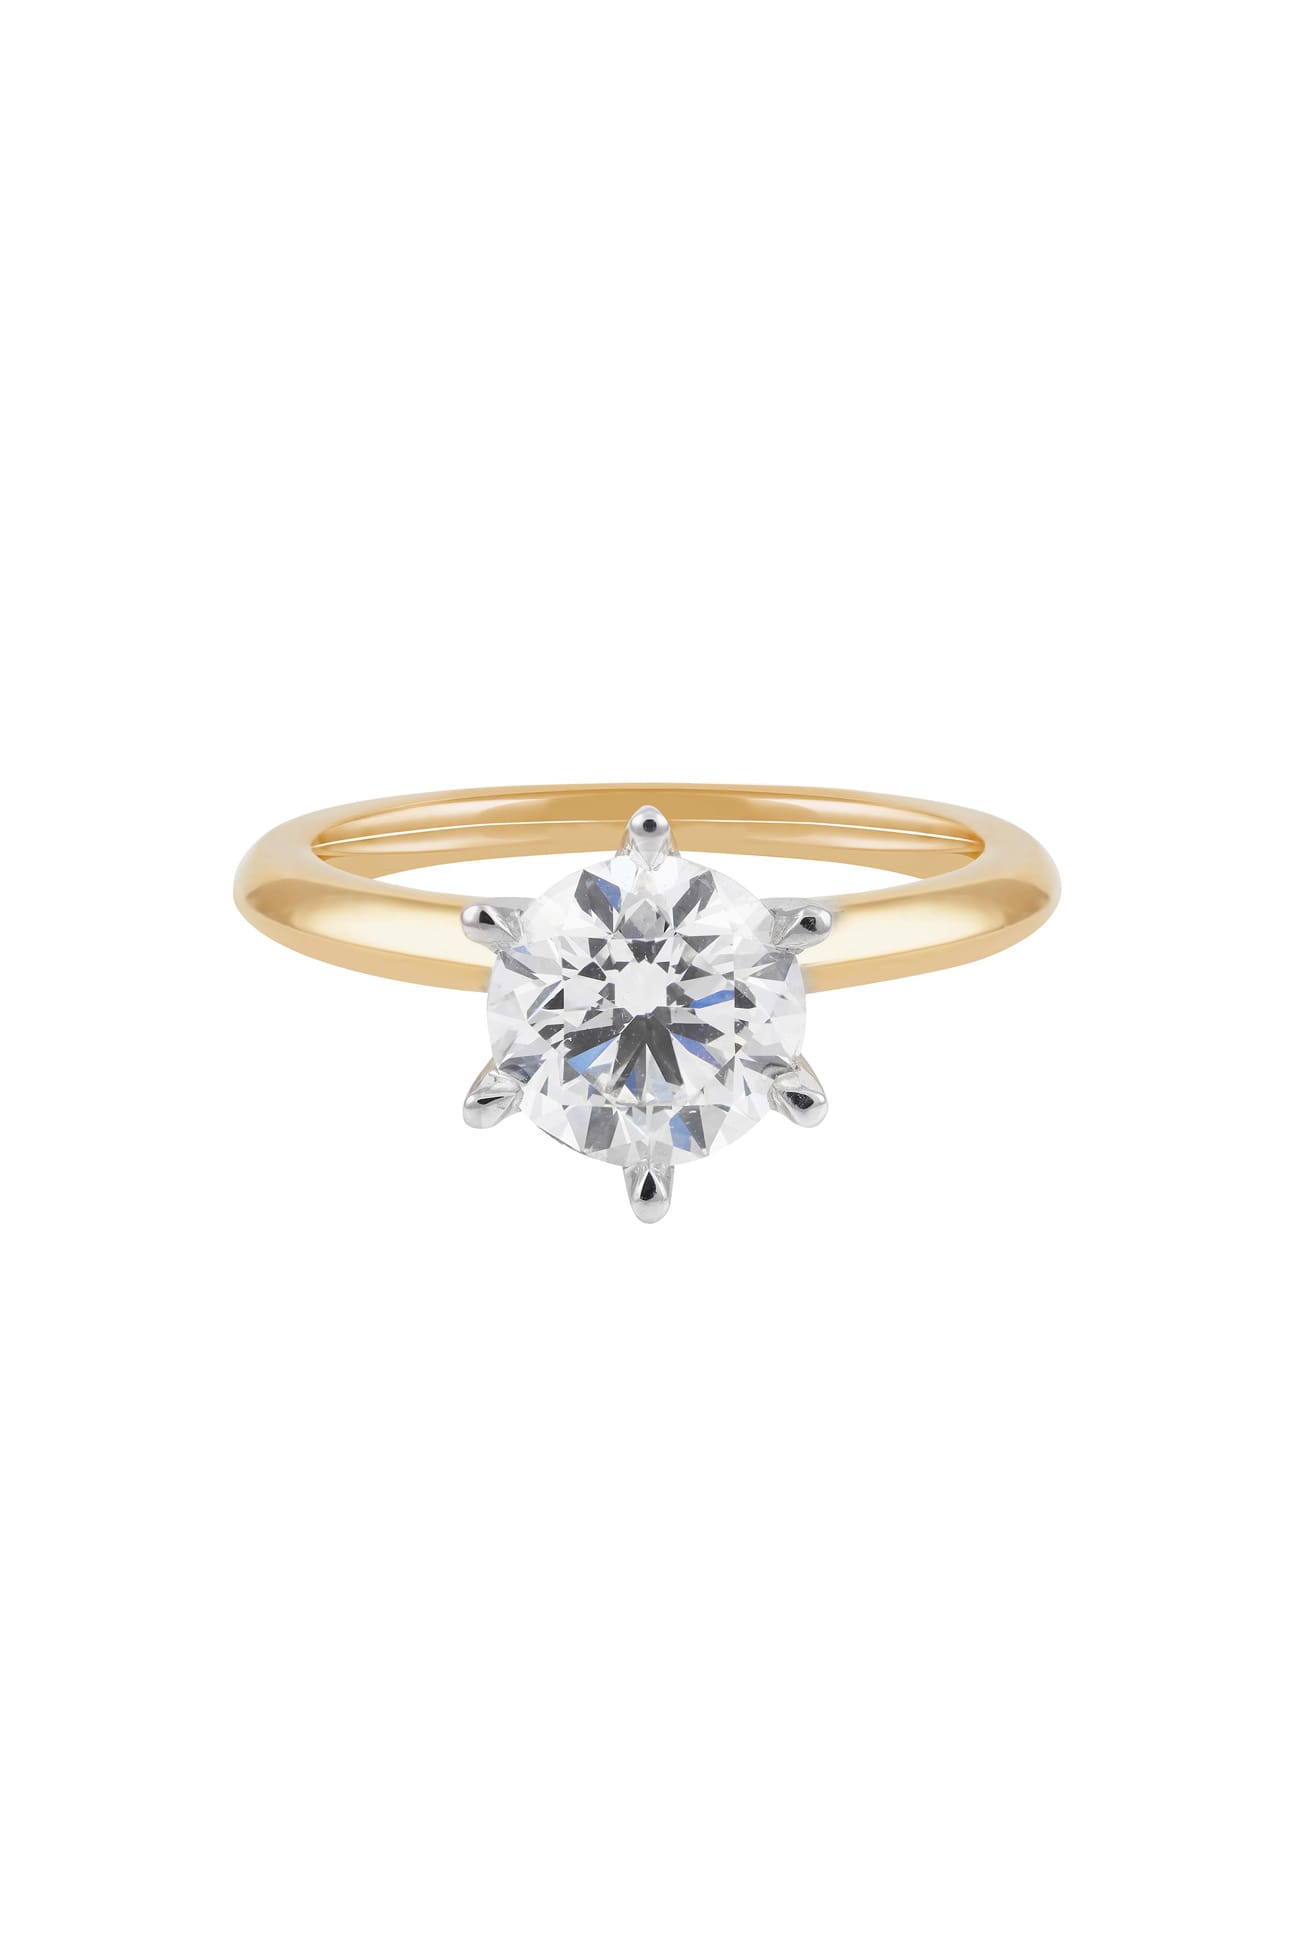 2.01ct 6 Claw Solitaire Engagement Ring available at LeGassick Diamonds and Jewellery Gold Coast, Australia.